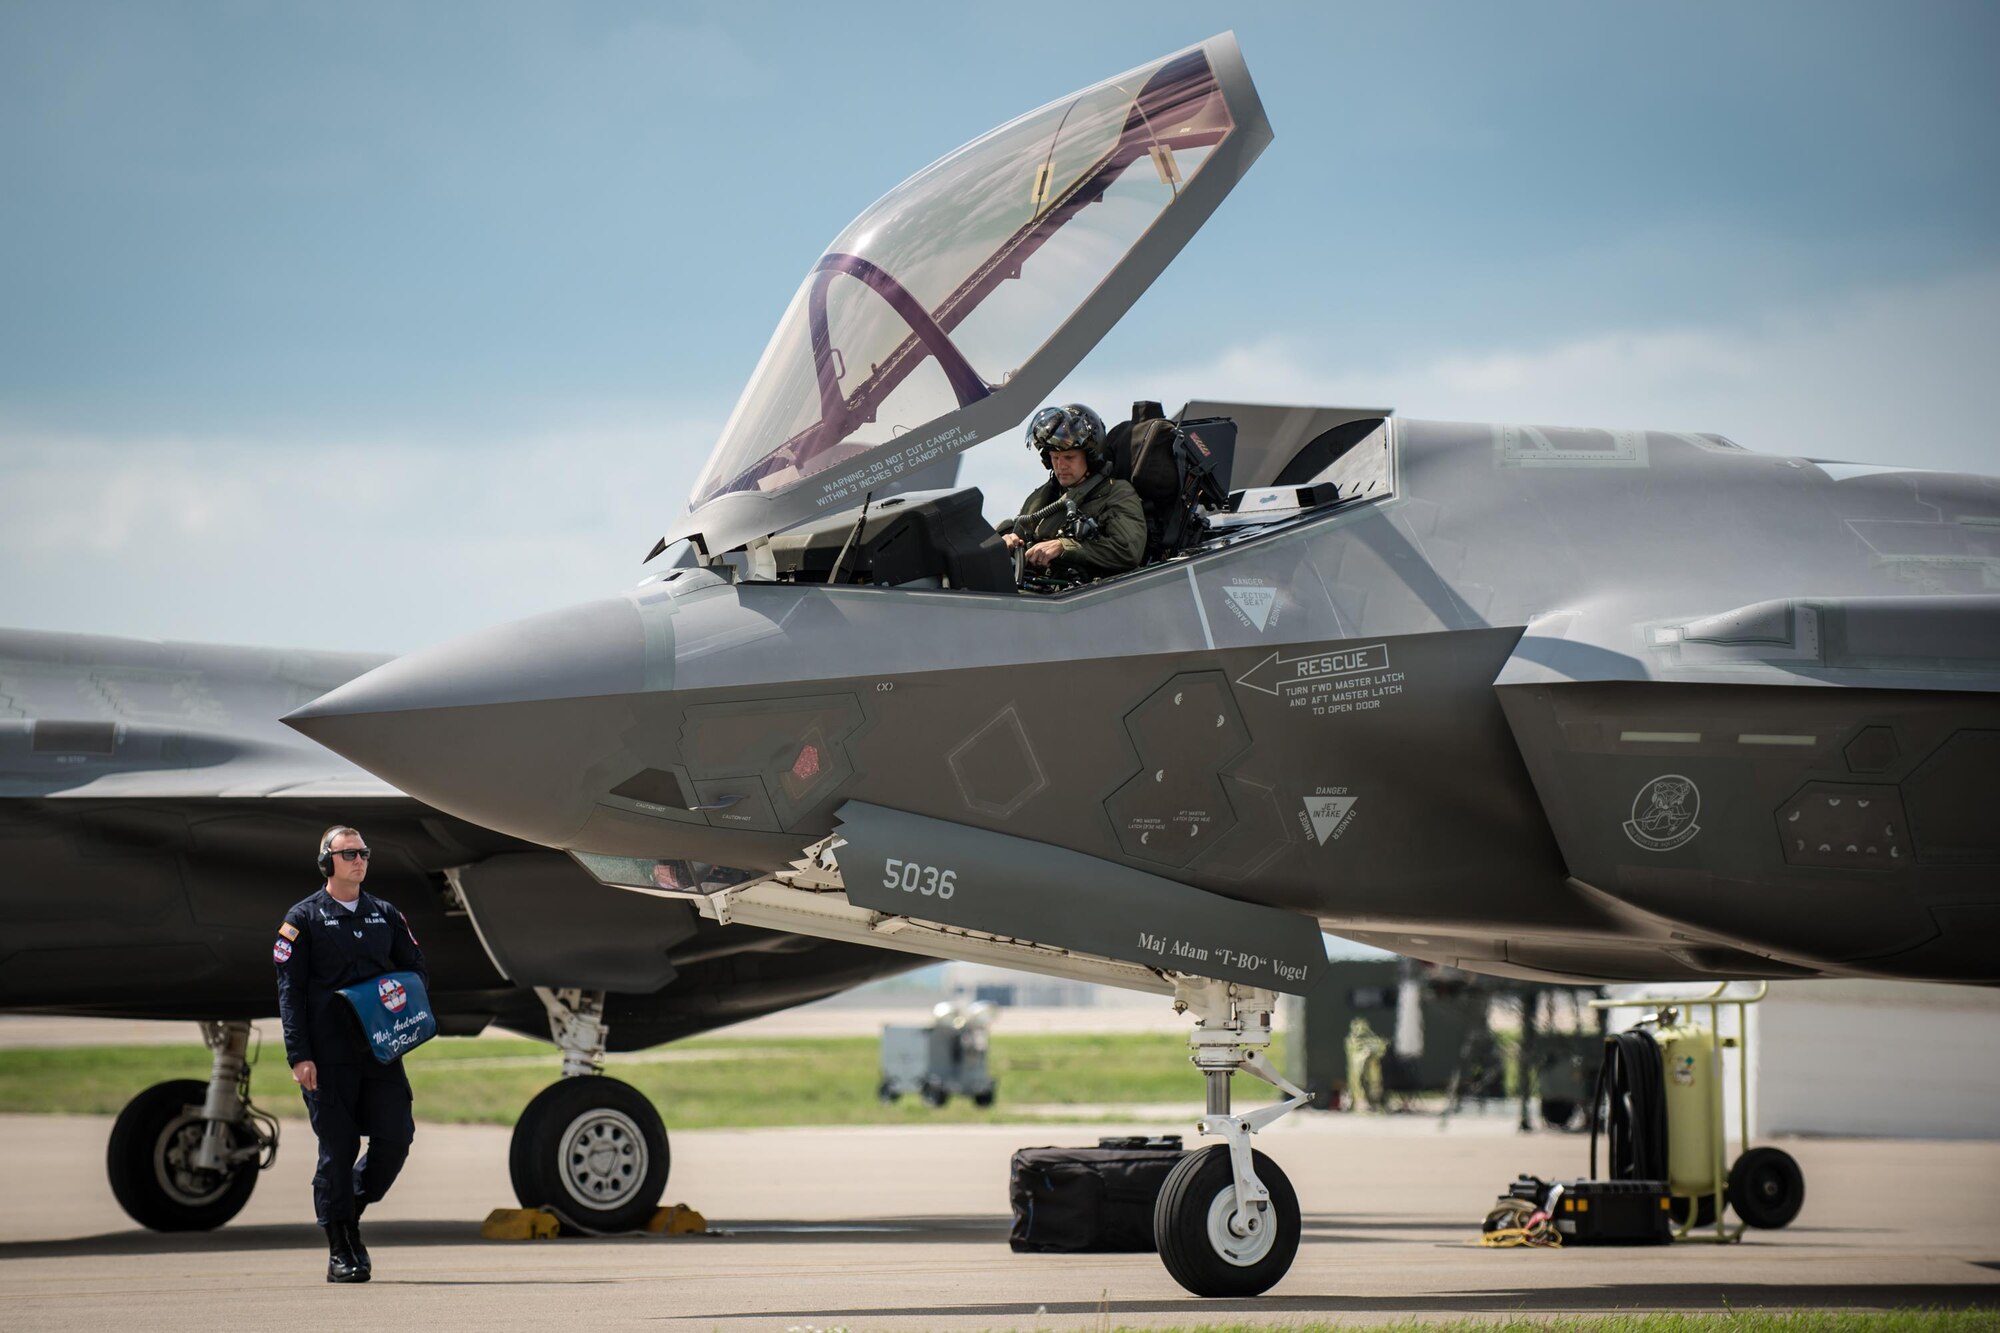 Maj. Will Andreotta, a pilot from the 61st Fighter Squadron at Luke Air Force Base, Ariz., parks his F-35 Lightning II figher aircraft on the flight line of the Kentucky Air National Guard Base in Louisville, Ky., April 20, 2017. The F-35, which is in town to perform in the Thunder Over Louisville air show on April 22, is the Air Force's newest fighter jet. (U.S. Air National Guard photo by Lt. Col. Dale Greer)